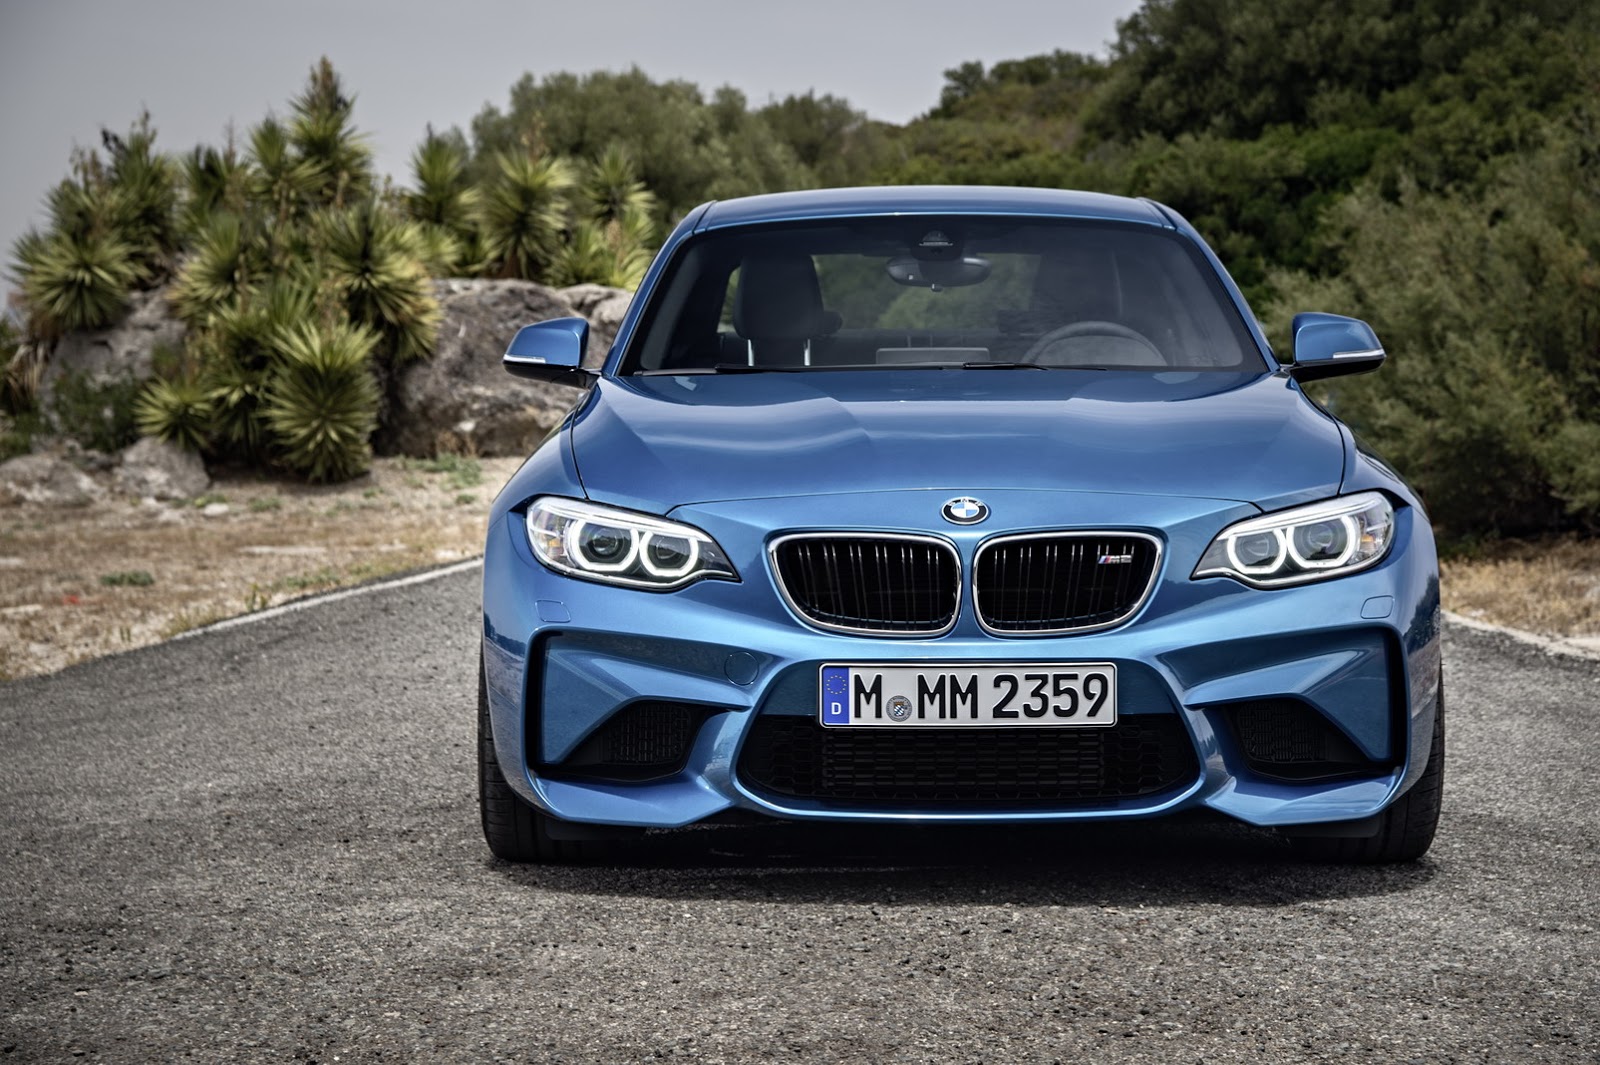 BMW M2 Coupe HD wallpapers, Desktop wallpaper - most viewed